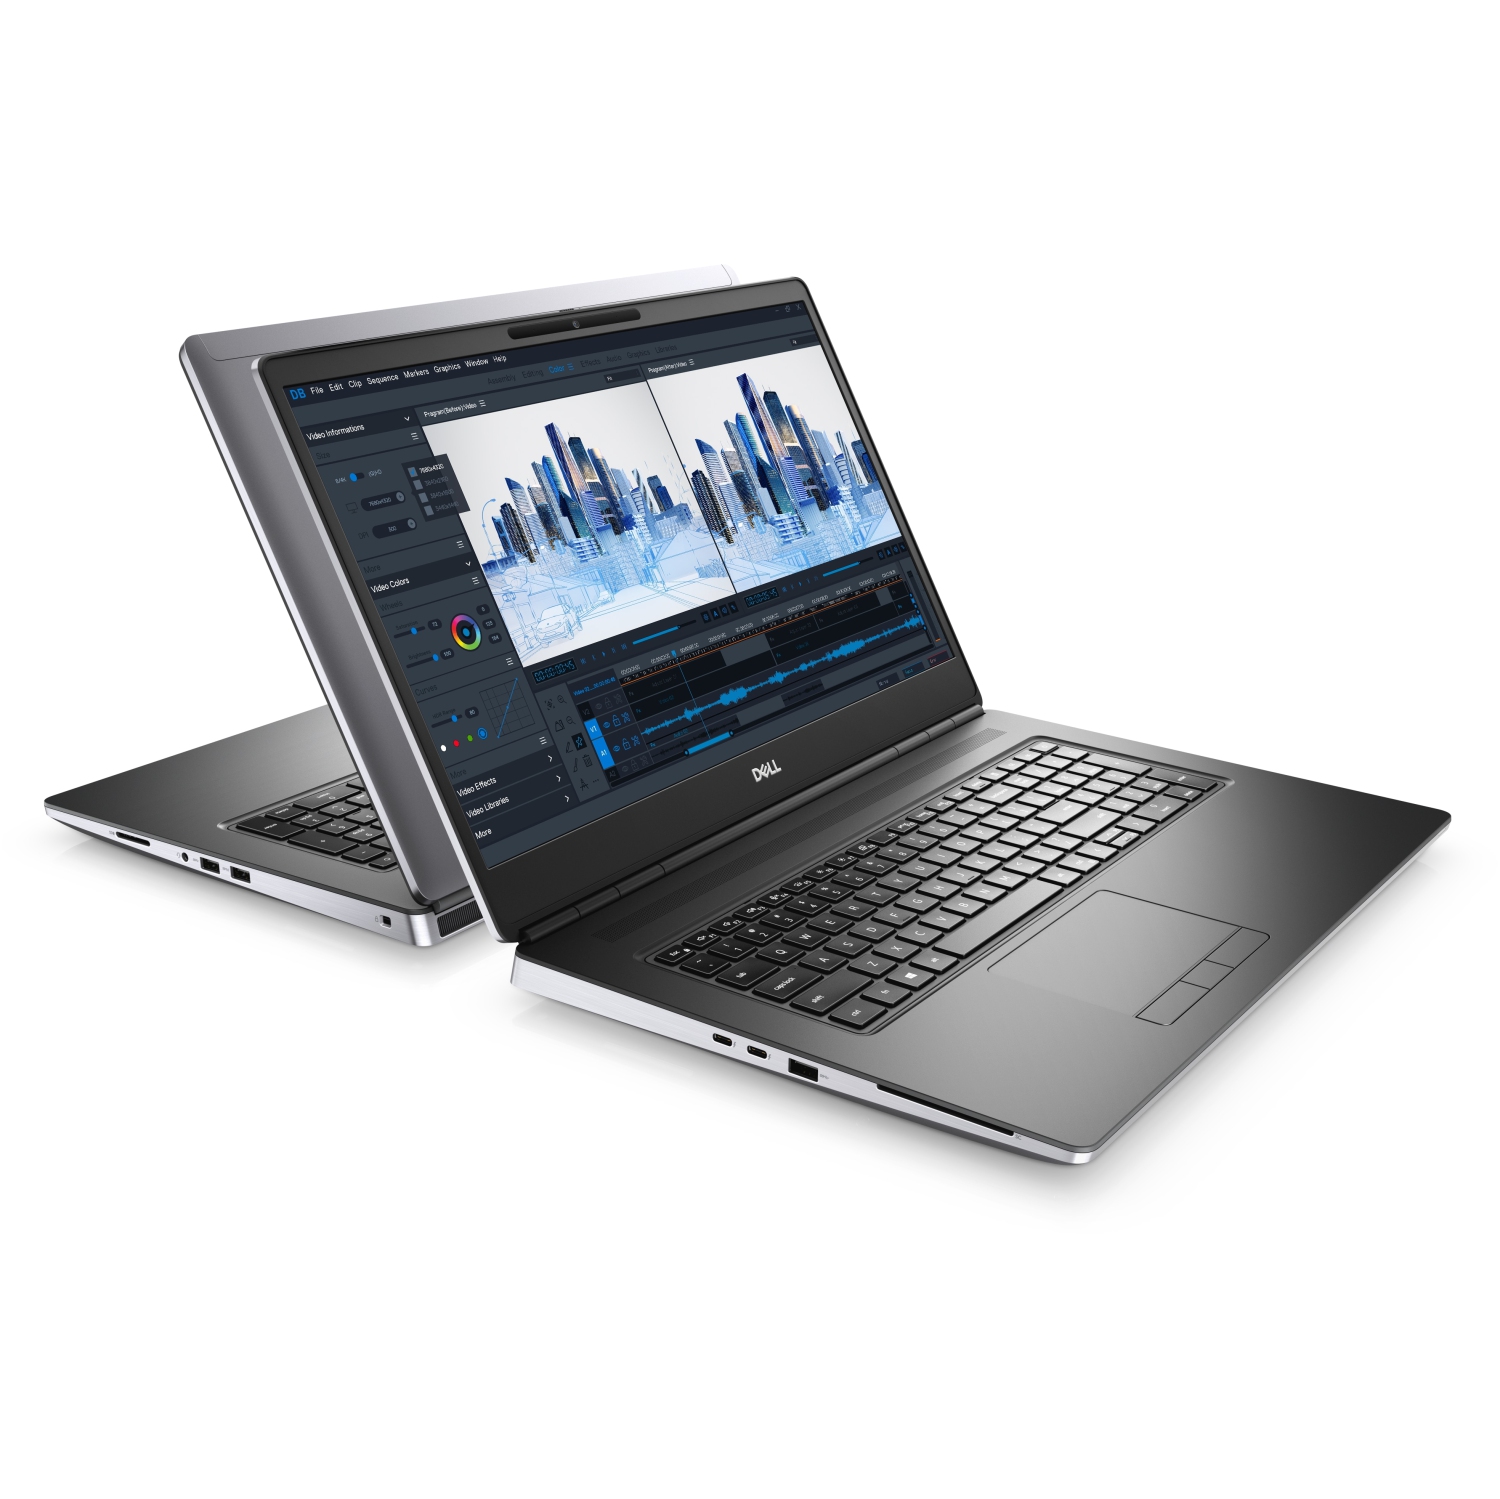 Refurbished (Excellent) – Dell Precision 7000 7760 Workstation Laptop (2021) | 17.3" 4K | Core i9 - 1TB SSD - 128GB RAM - RTX A5000 | 8 Cores @ 5 GHz - 11th Gen CPU - 16GB GDDR6